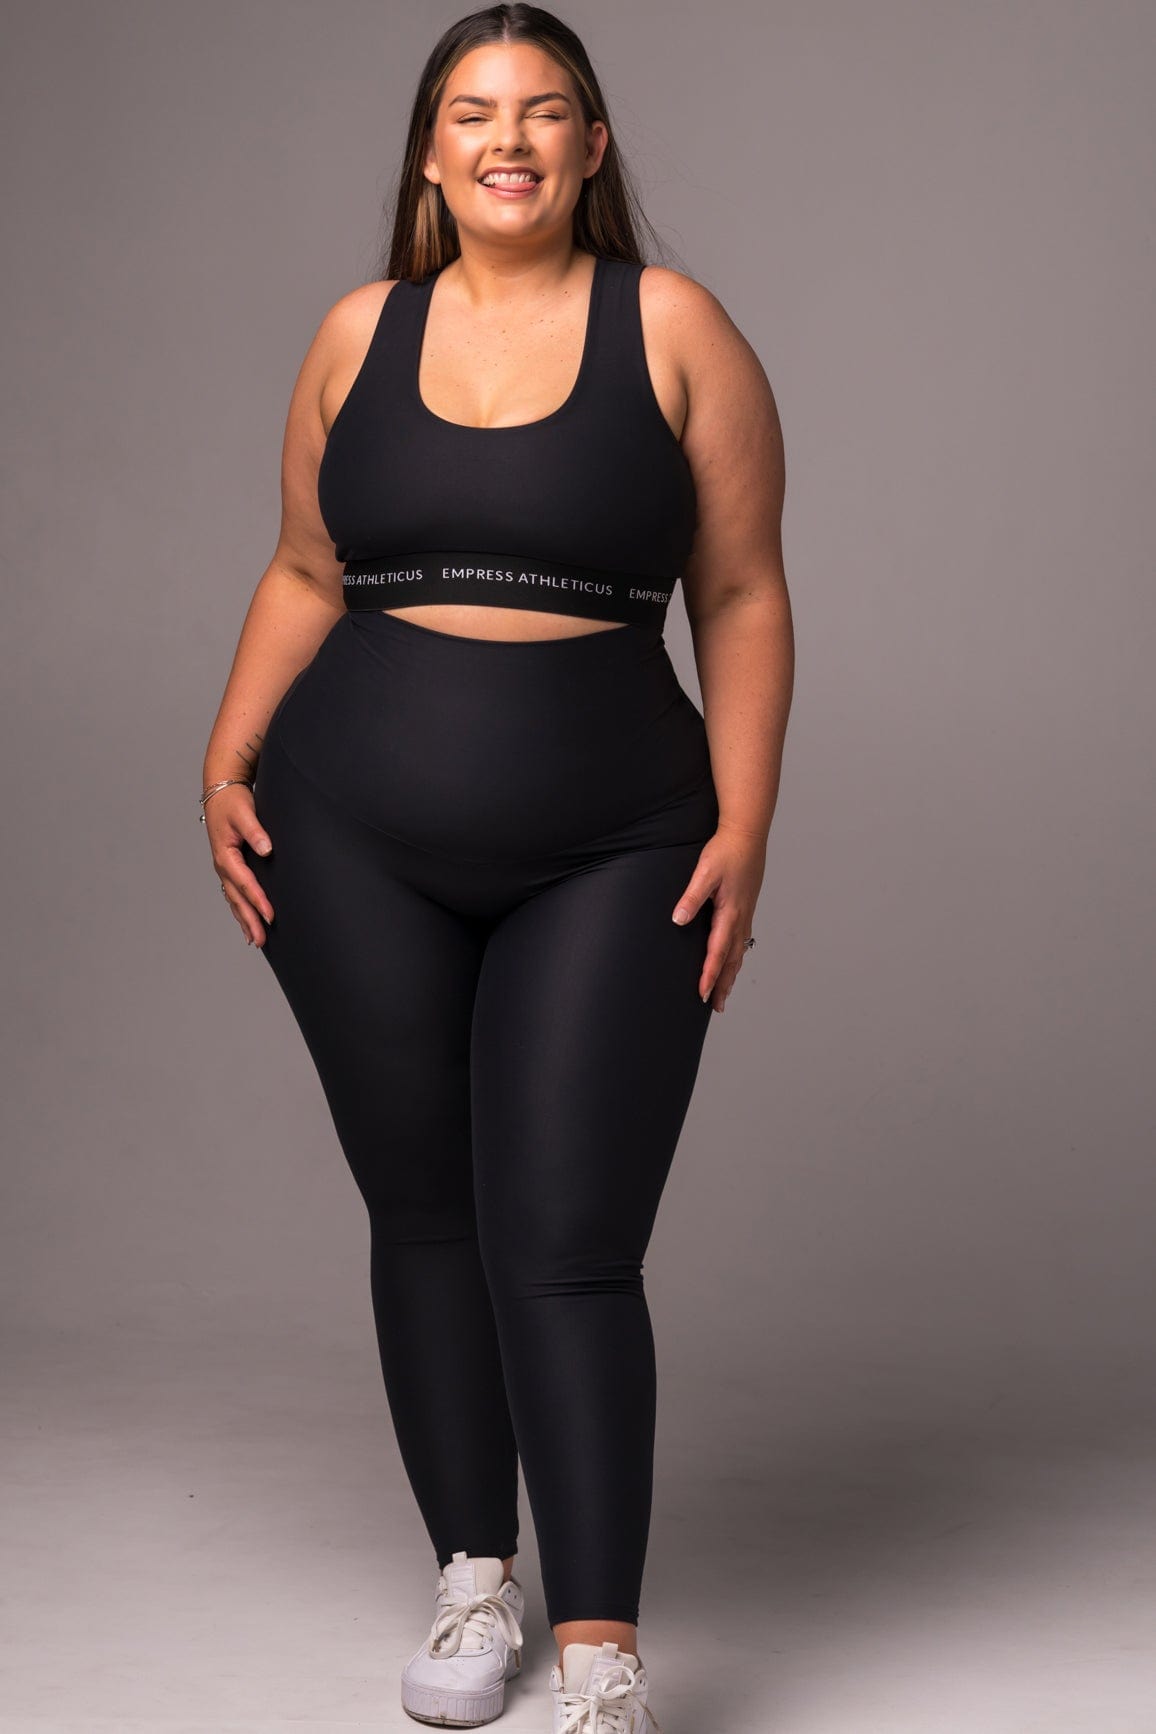 Black Maternity Ankle Biter Leggings: The Perfect Choice